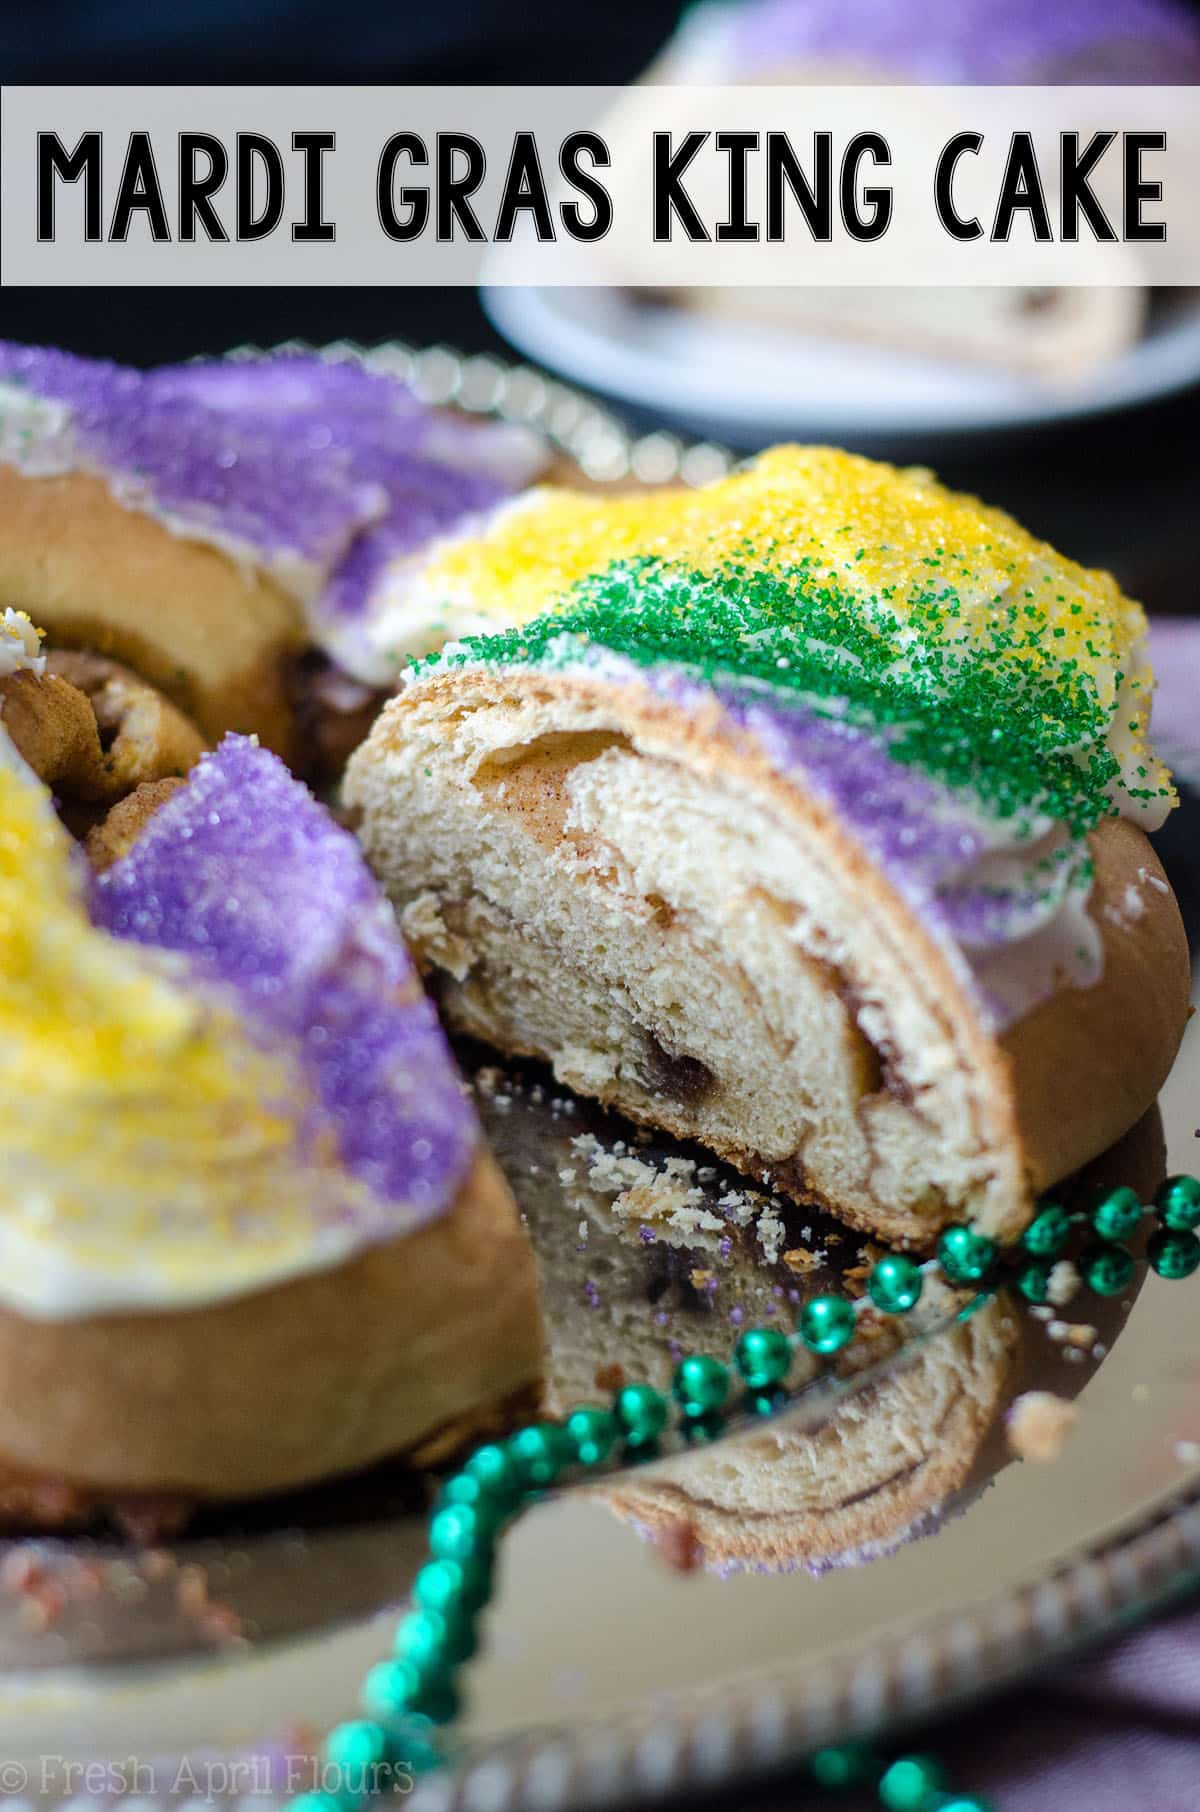 This traditional Mardi Gras King cake is worlds better than anything you can buy at the grocery store. This simple spiced yeast dough gets filled with a cinnamon sugar filling, twisted into a ring, and adorned with colored sugar. Add a tiny plastic baby to pull the tradition full circle! via @frshaprilflours